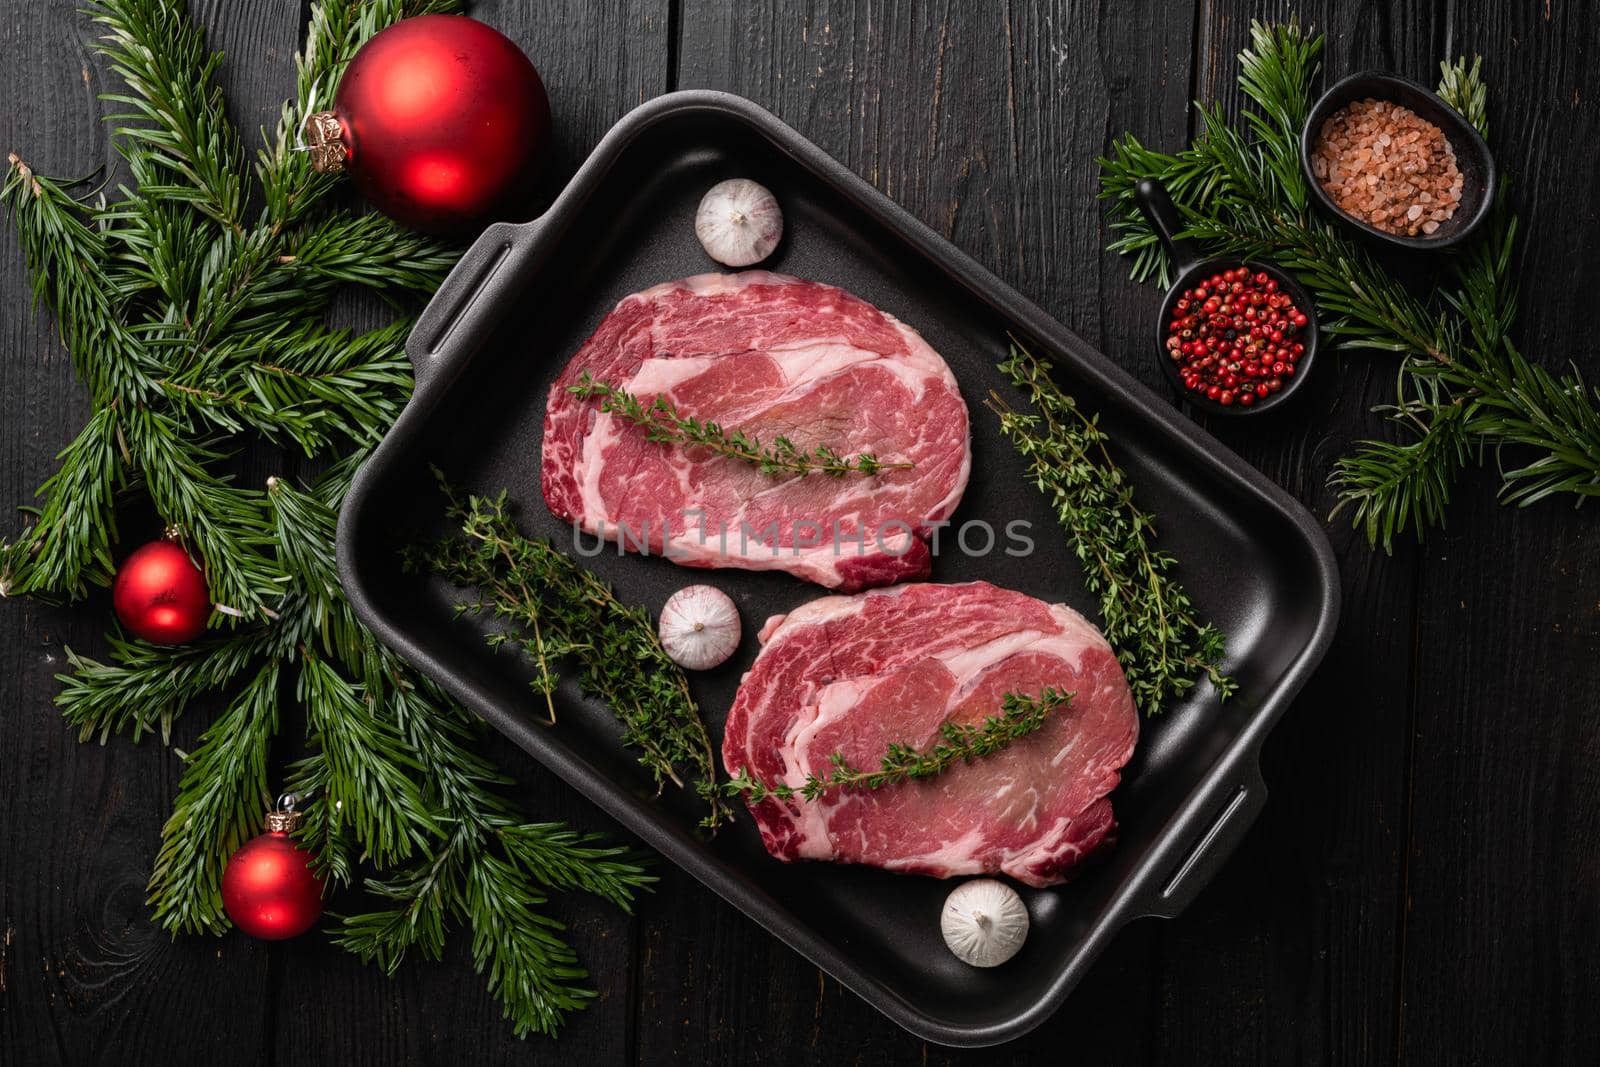 Raw rib eye beef steak with pepper and herbs to the Christmas and New Year, on black wooden table background, top view flat lay by Ilianesolenyi